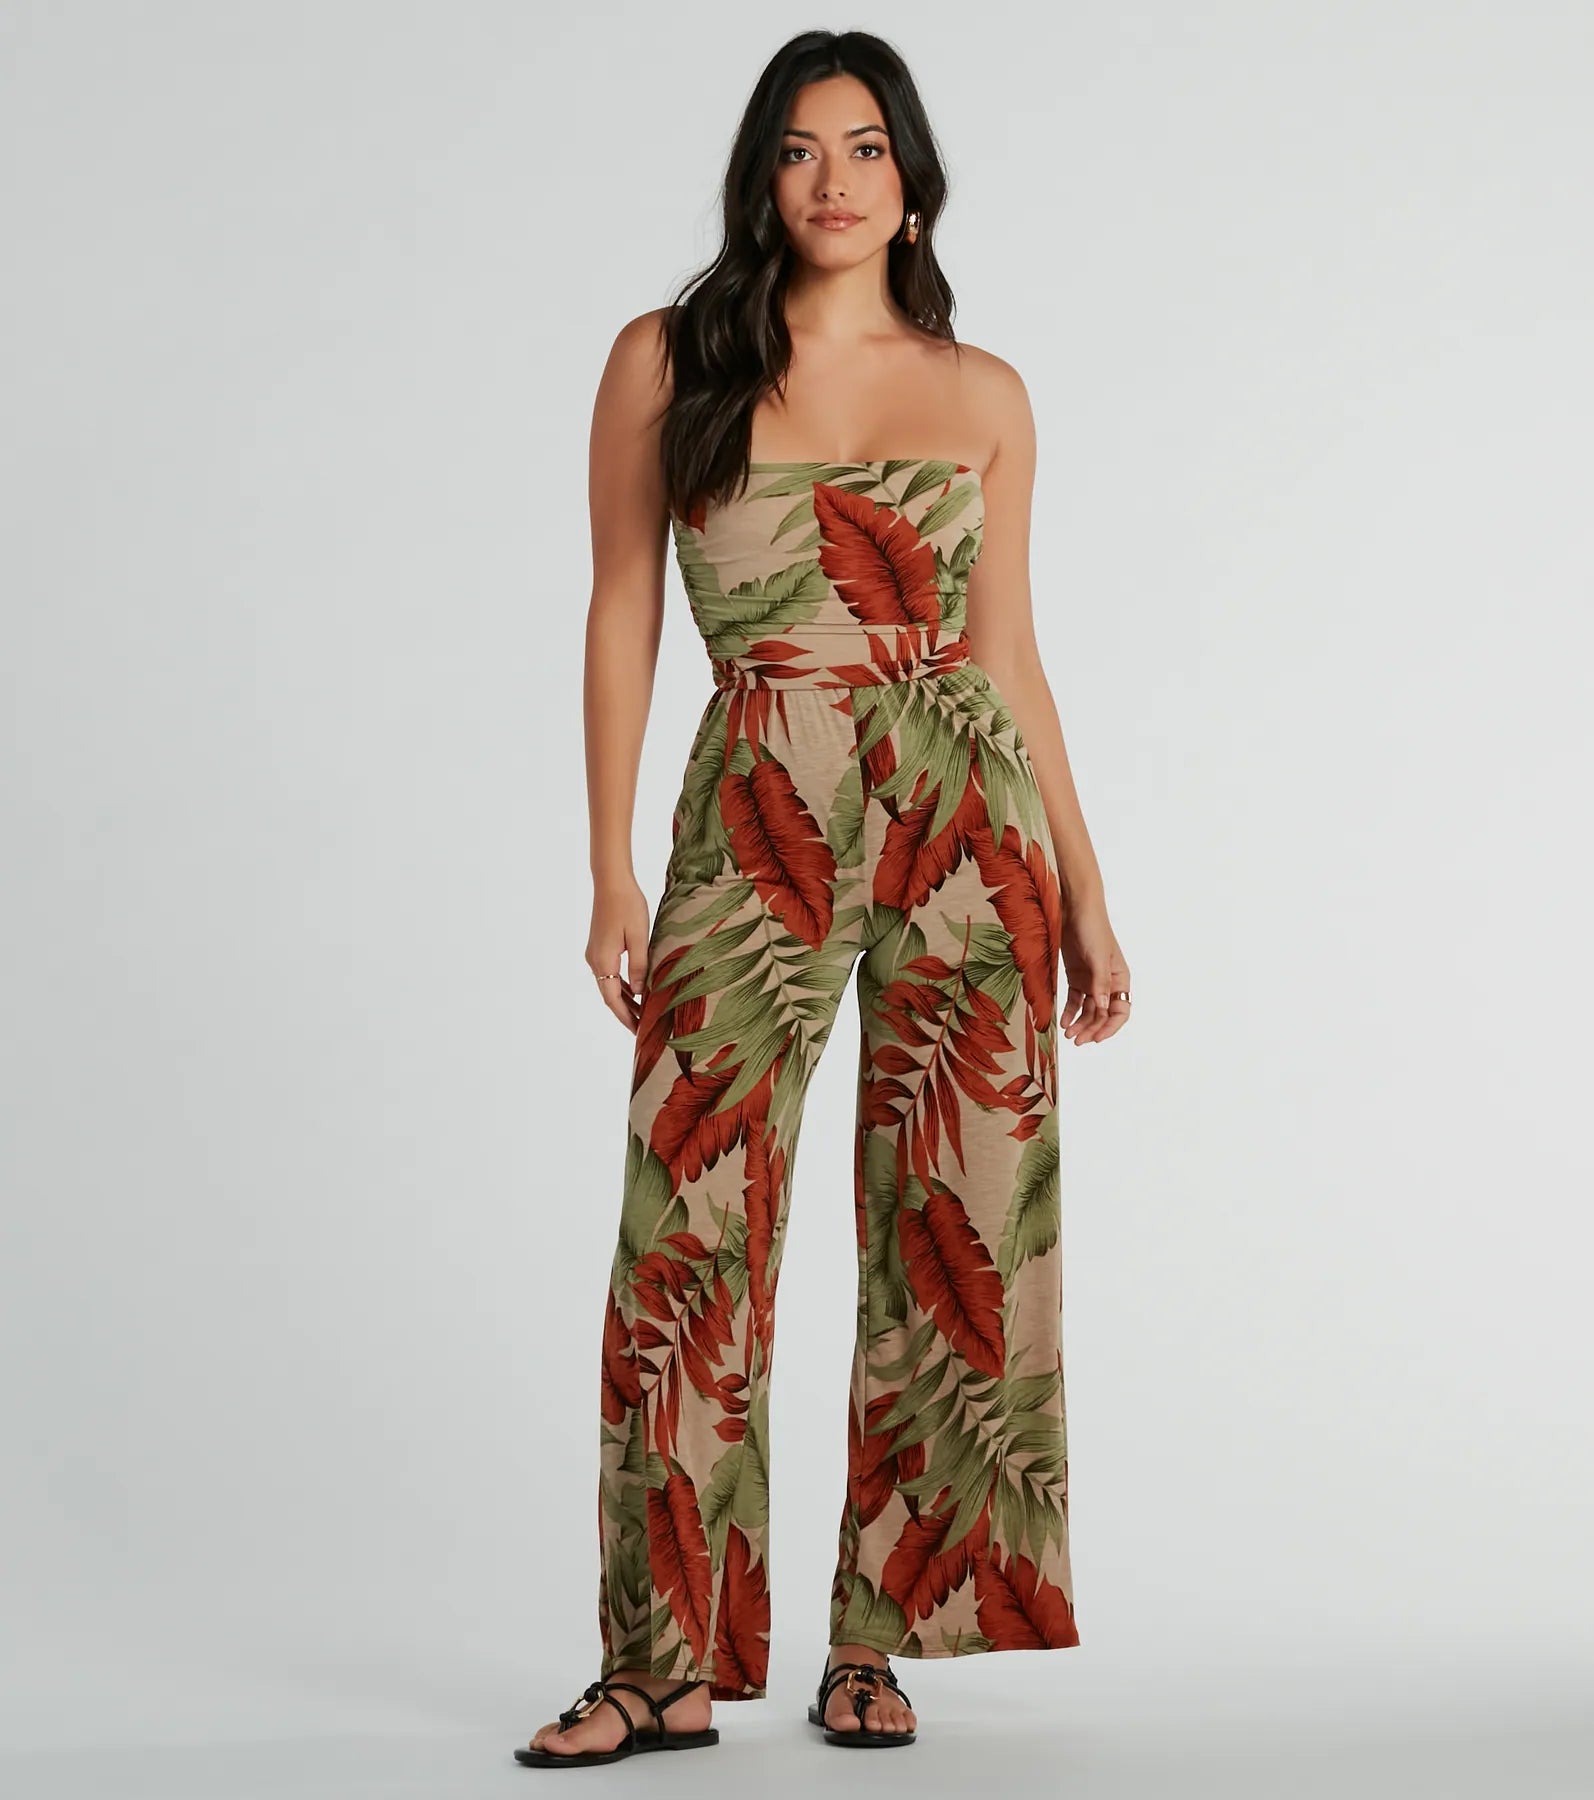 Strapless Knit Tropical Print Straight Neck Stretchy Fitted Beach Dress/Jumpsuit